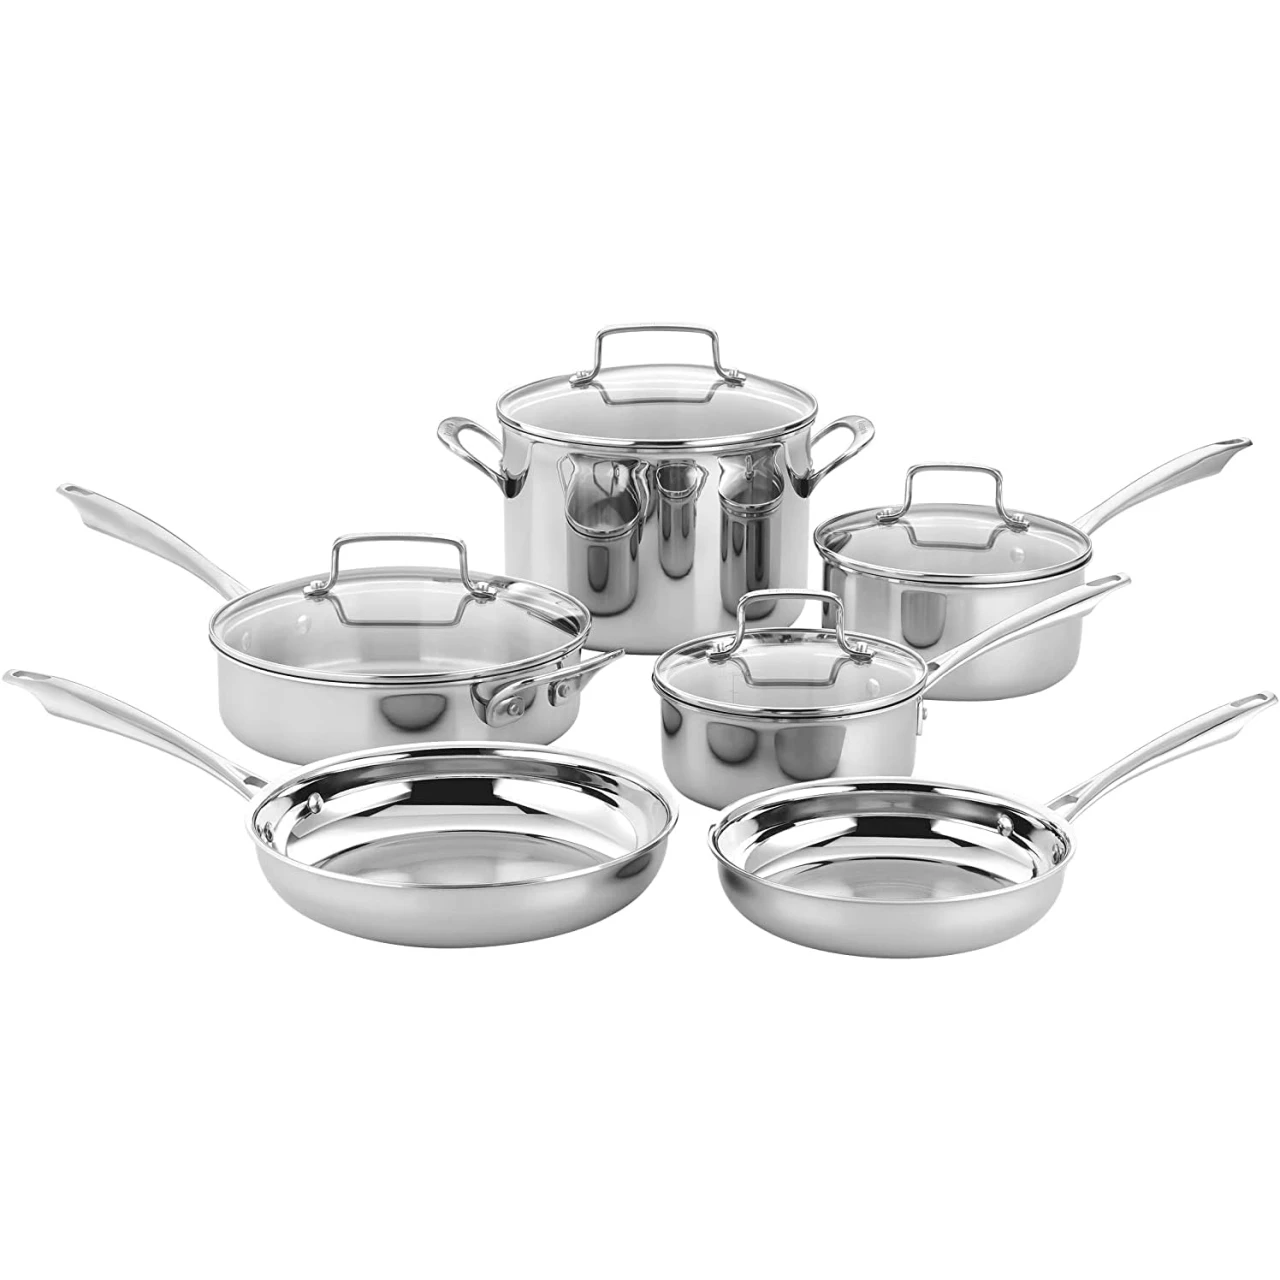 Cuisinart Classic Pots &amp; Pans Set, 10 pcs Cookware Set with Saucepans, Saute pans, &amp; Skillets- Tapered Rims for Drip Free Pouring &amp; Cool Grip Handles, Stainless Steel, TPS-10